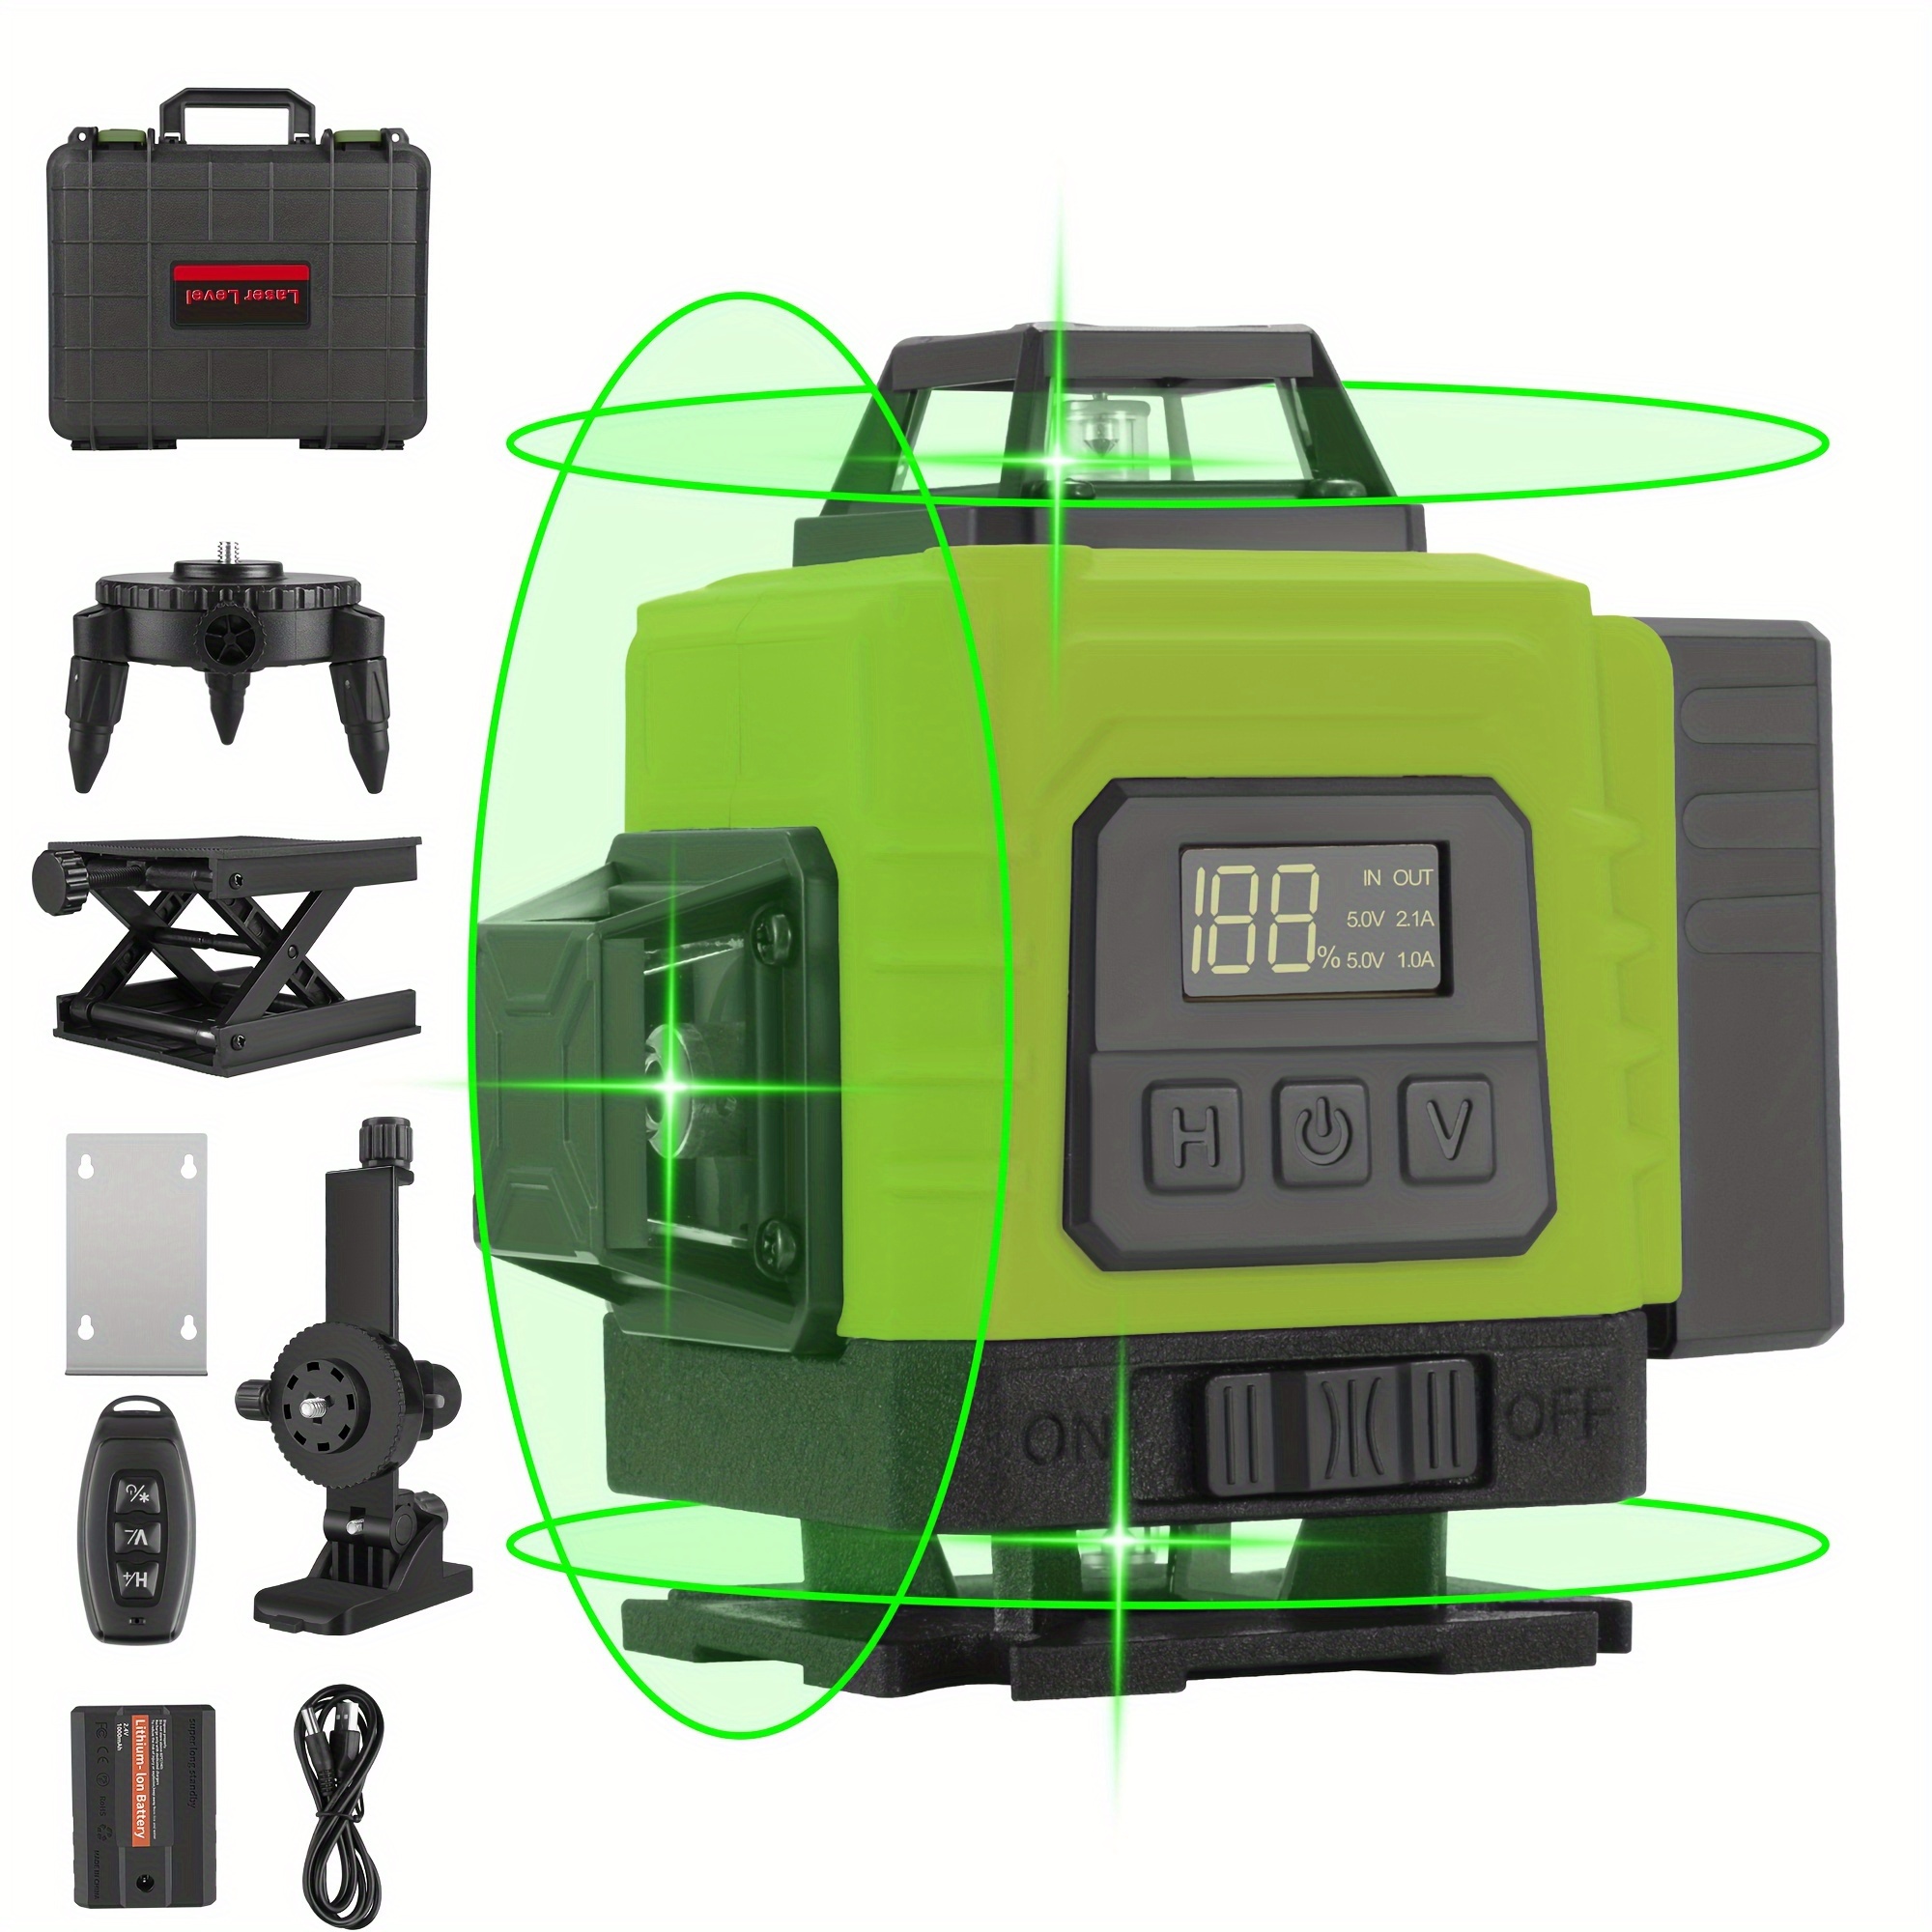 

1 Set Laser Level 16 Lines 4d Self-leveling Horizontal And Vertical Cross Super Powerful Green Beams, Rechargeable Lithium Battery, Measuring Tool